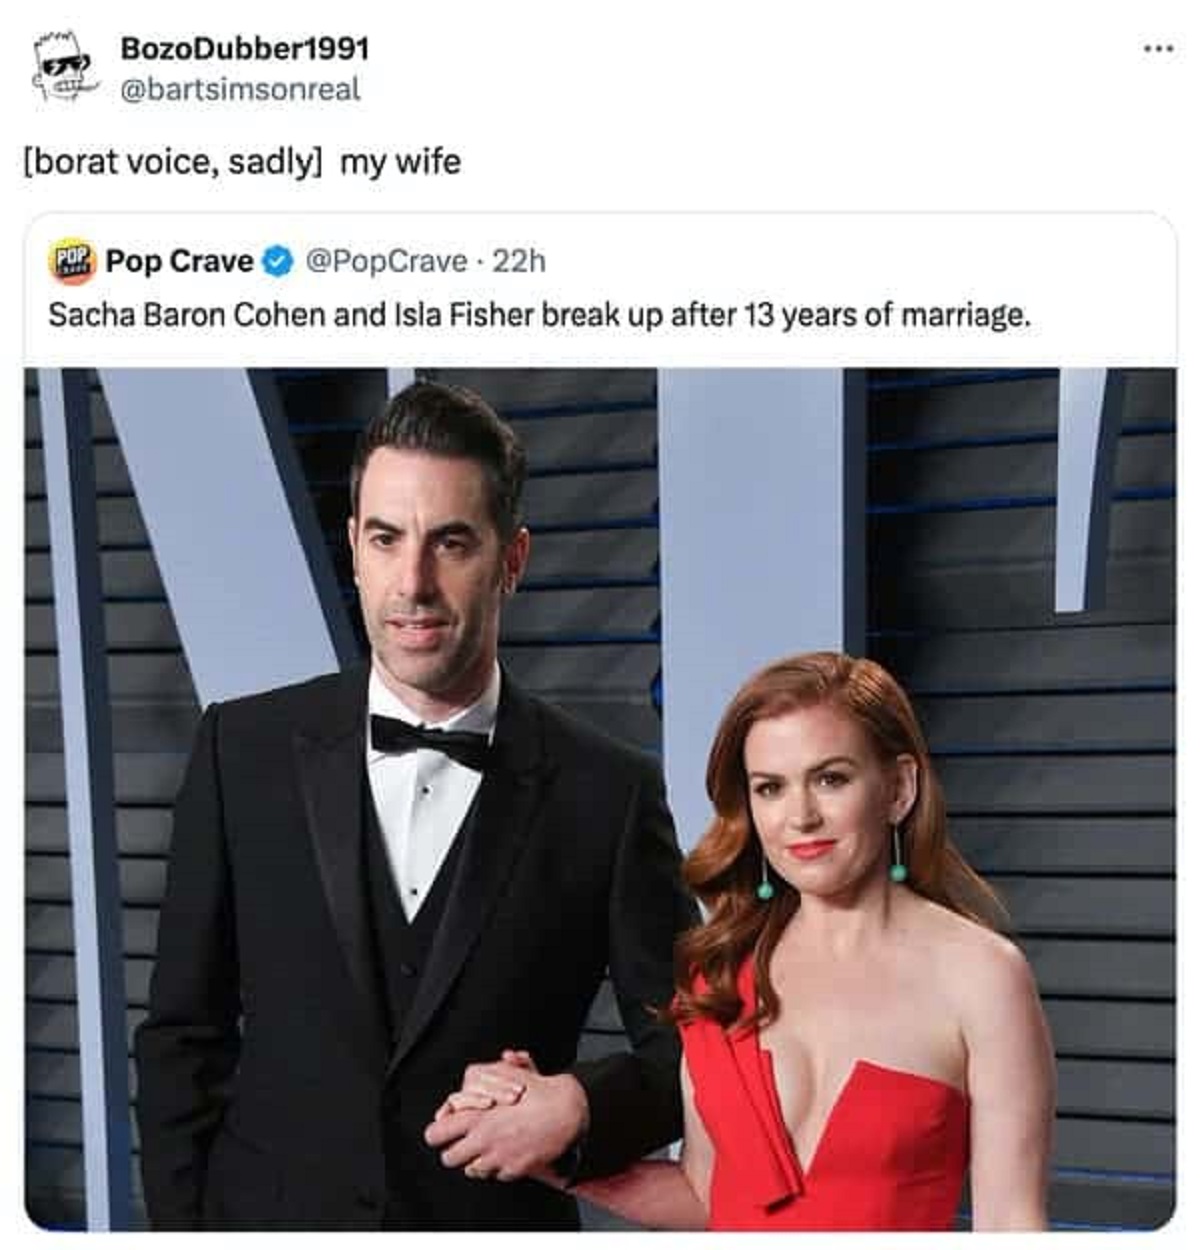 Isla Fisher - BozoDubber1991 borat voice, sadly my wife. Pop Crave 22h Sacha Baron Cohen and Isla Fisher break up after 13 years of marriage.